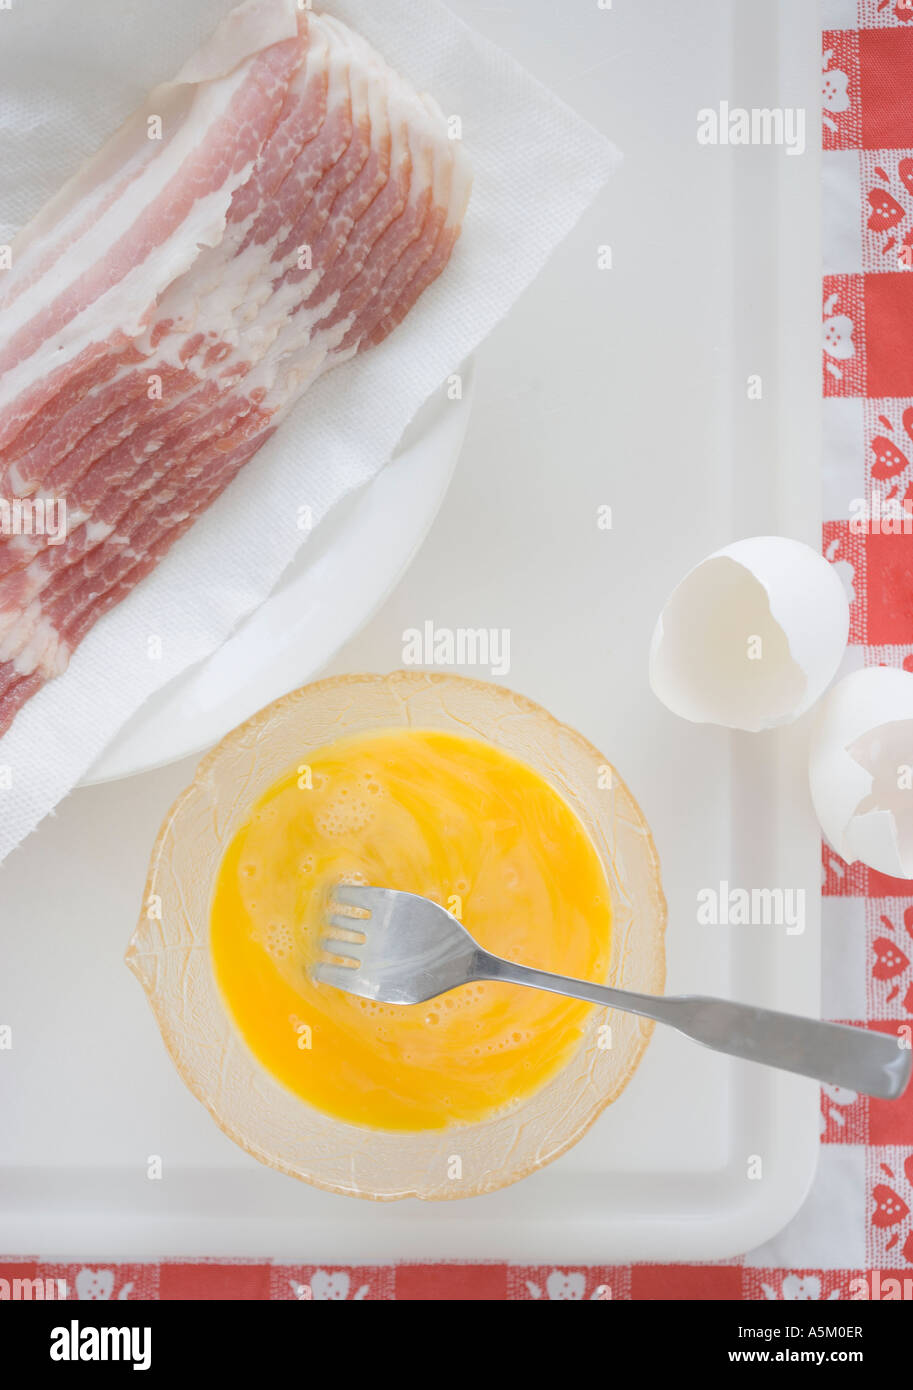 High angle view of raw bacon and eggs Stock Photo